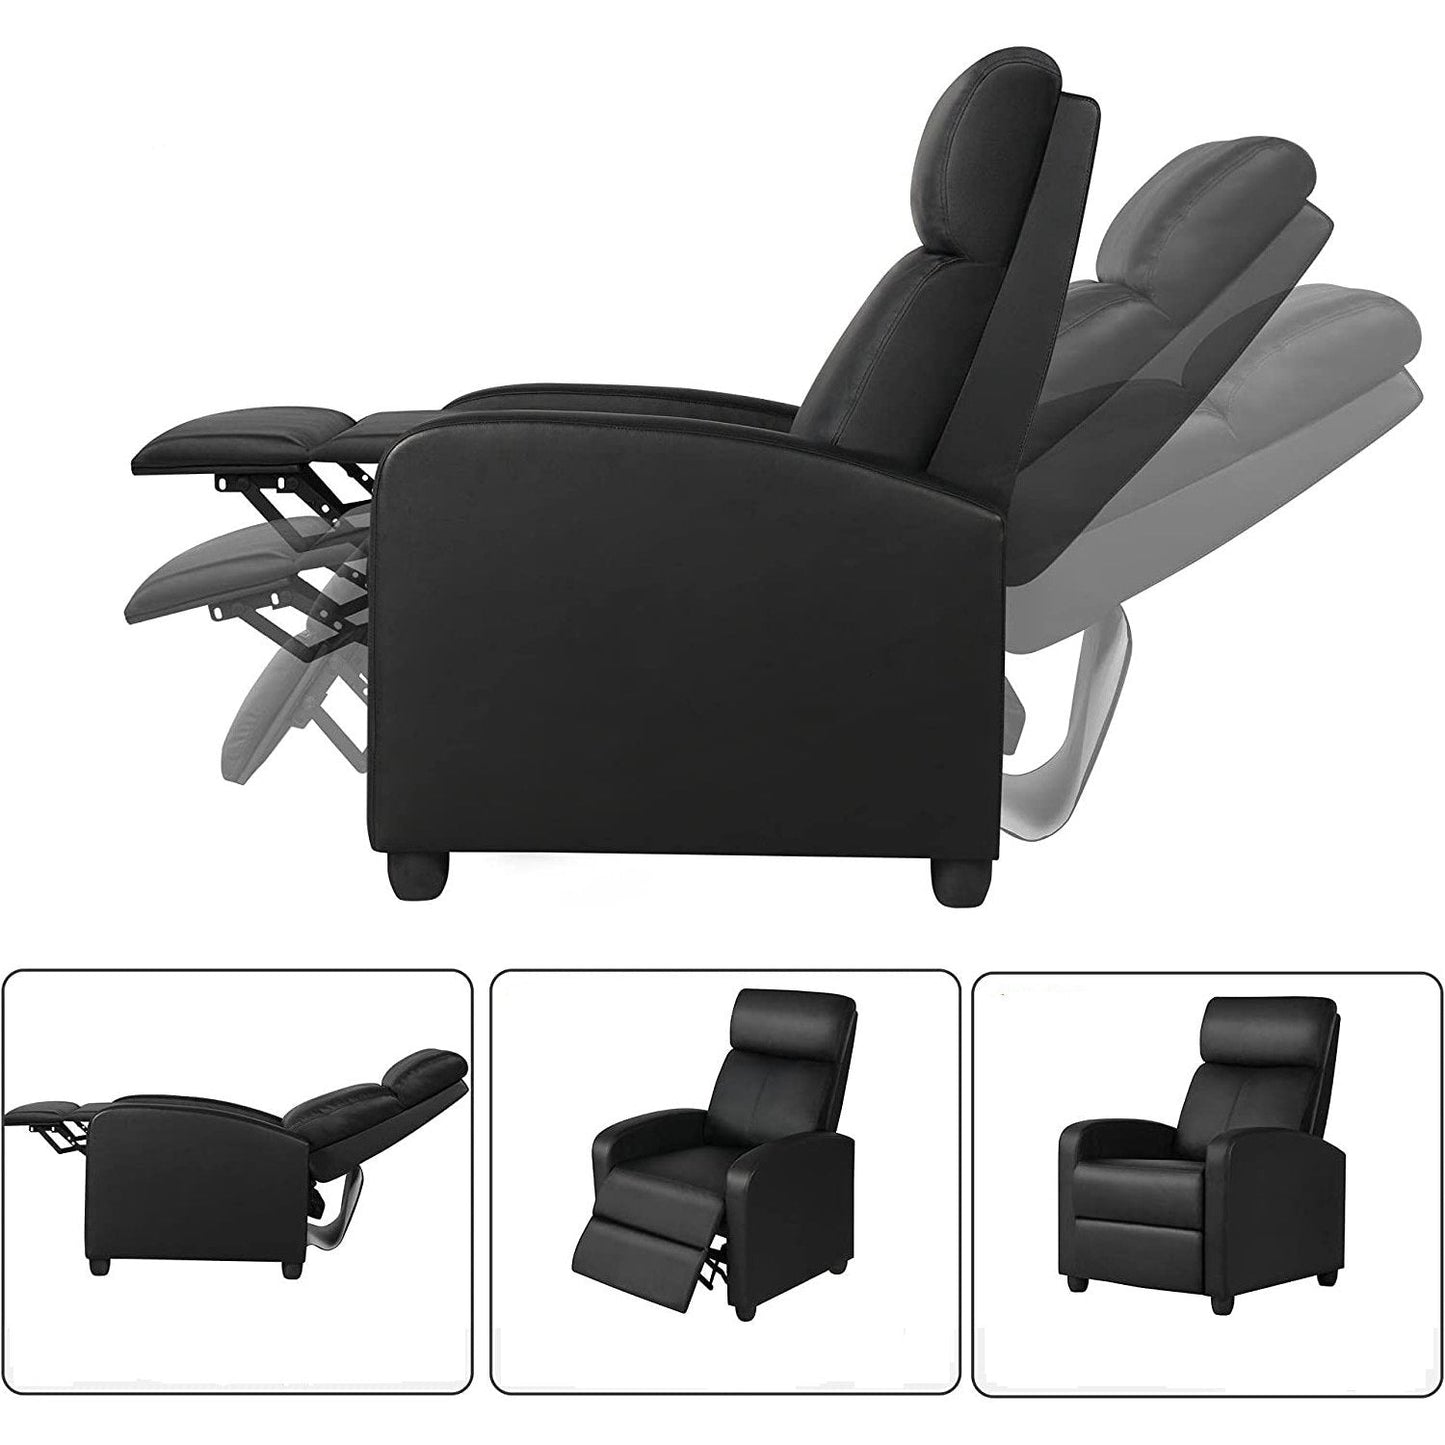 Black High-Density Faux Leather Push Back Recliner Chair